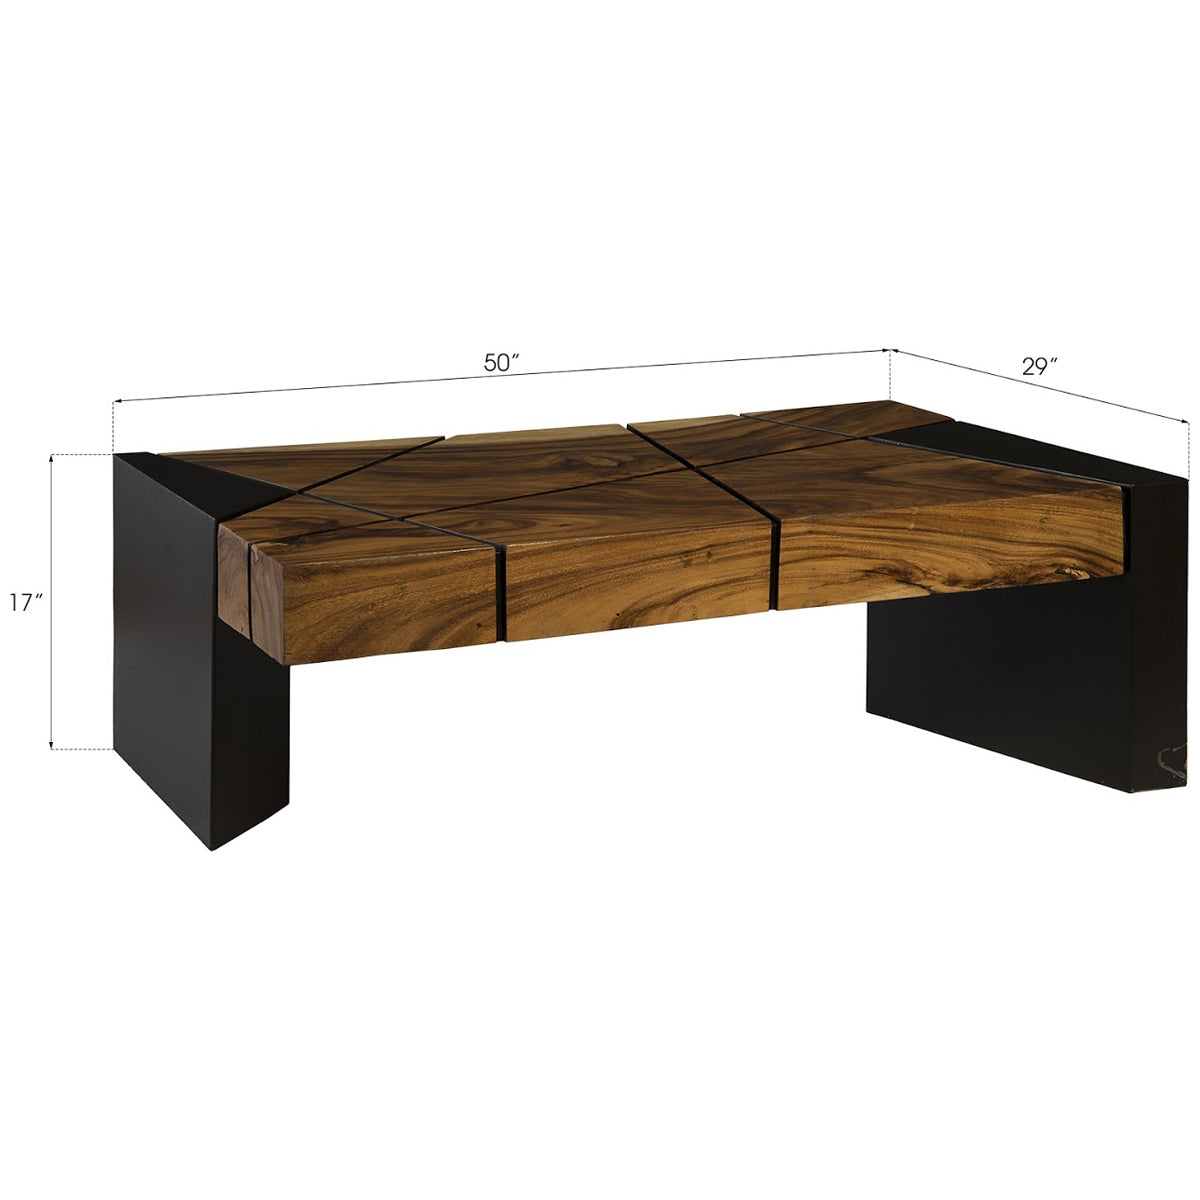 Phillips Collection Criss Cross Coffee Table on Black Iron Legs